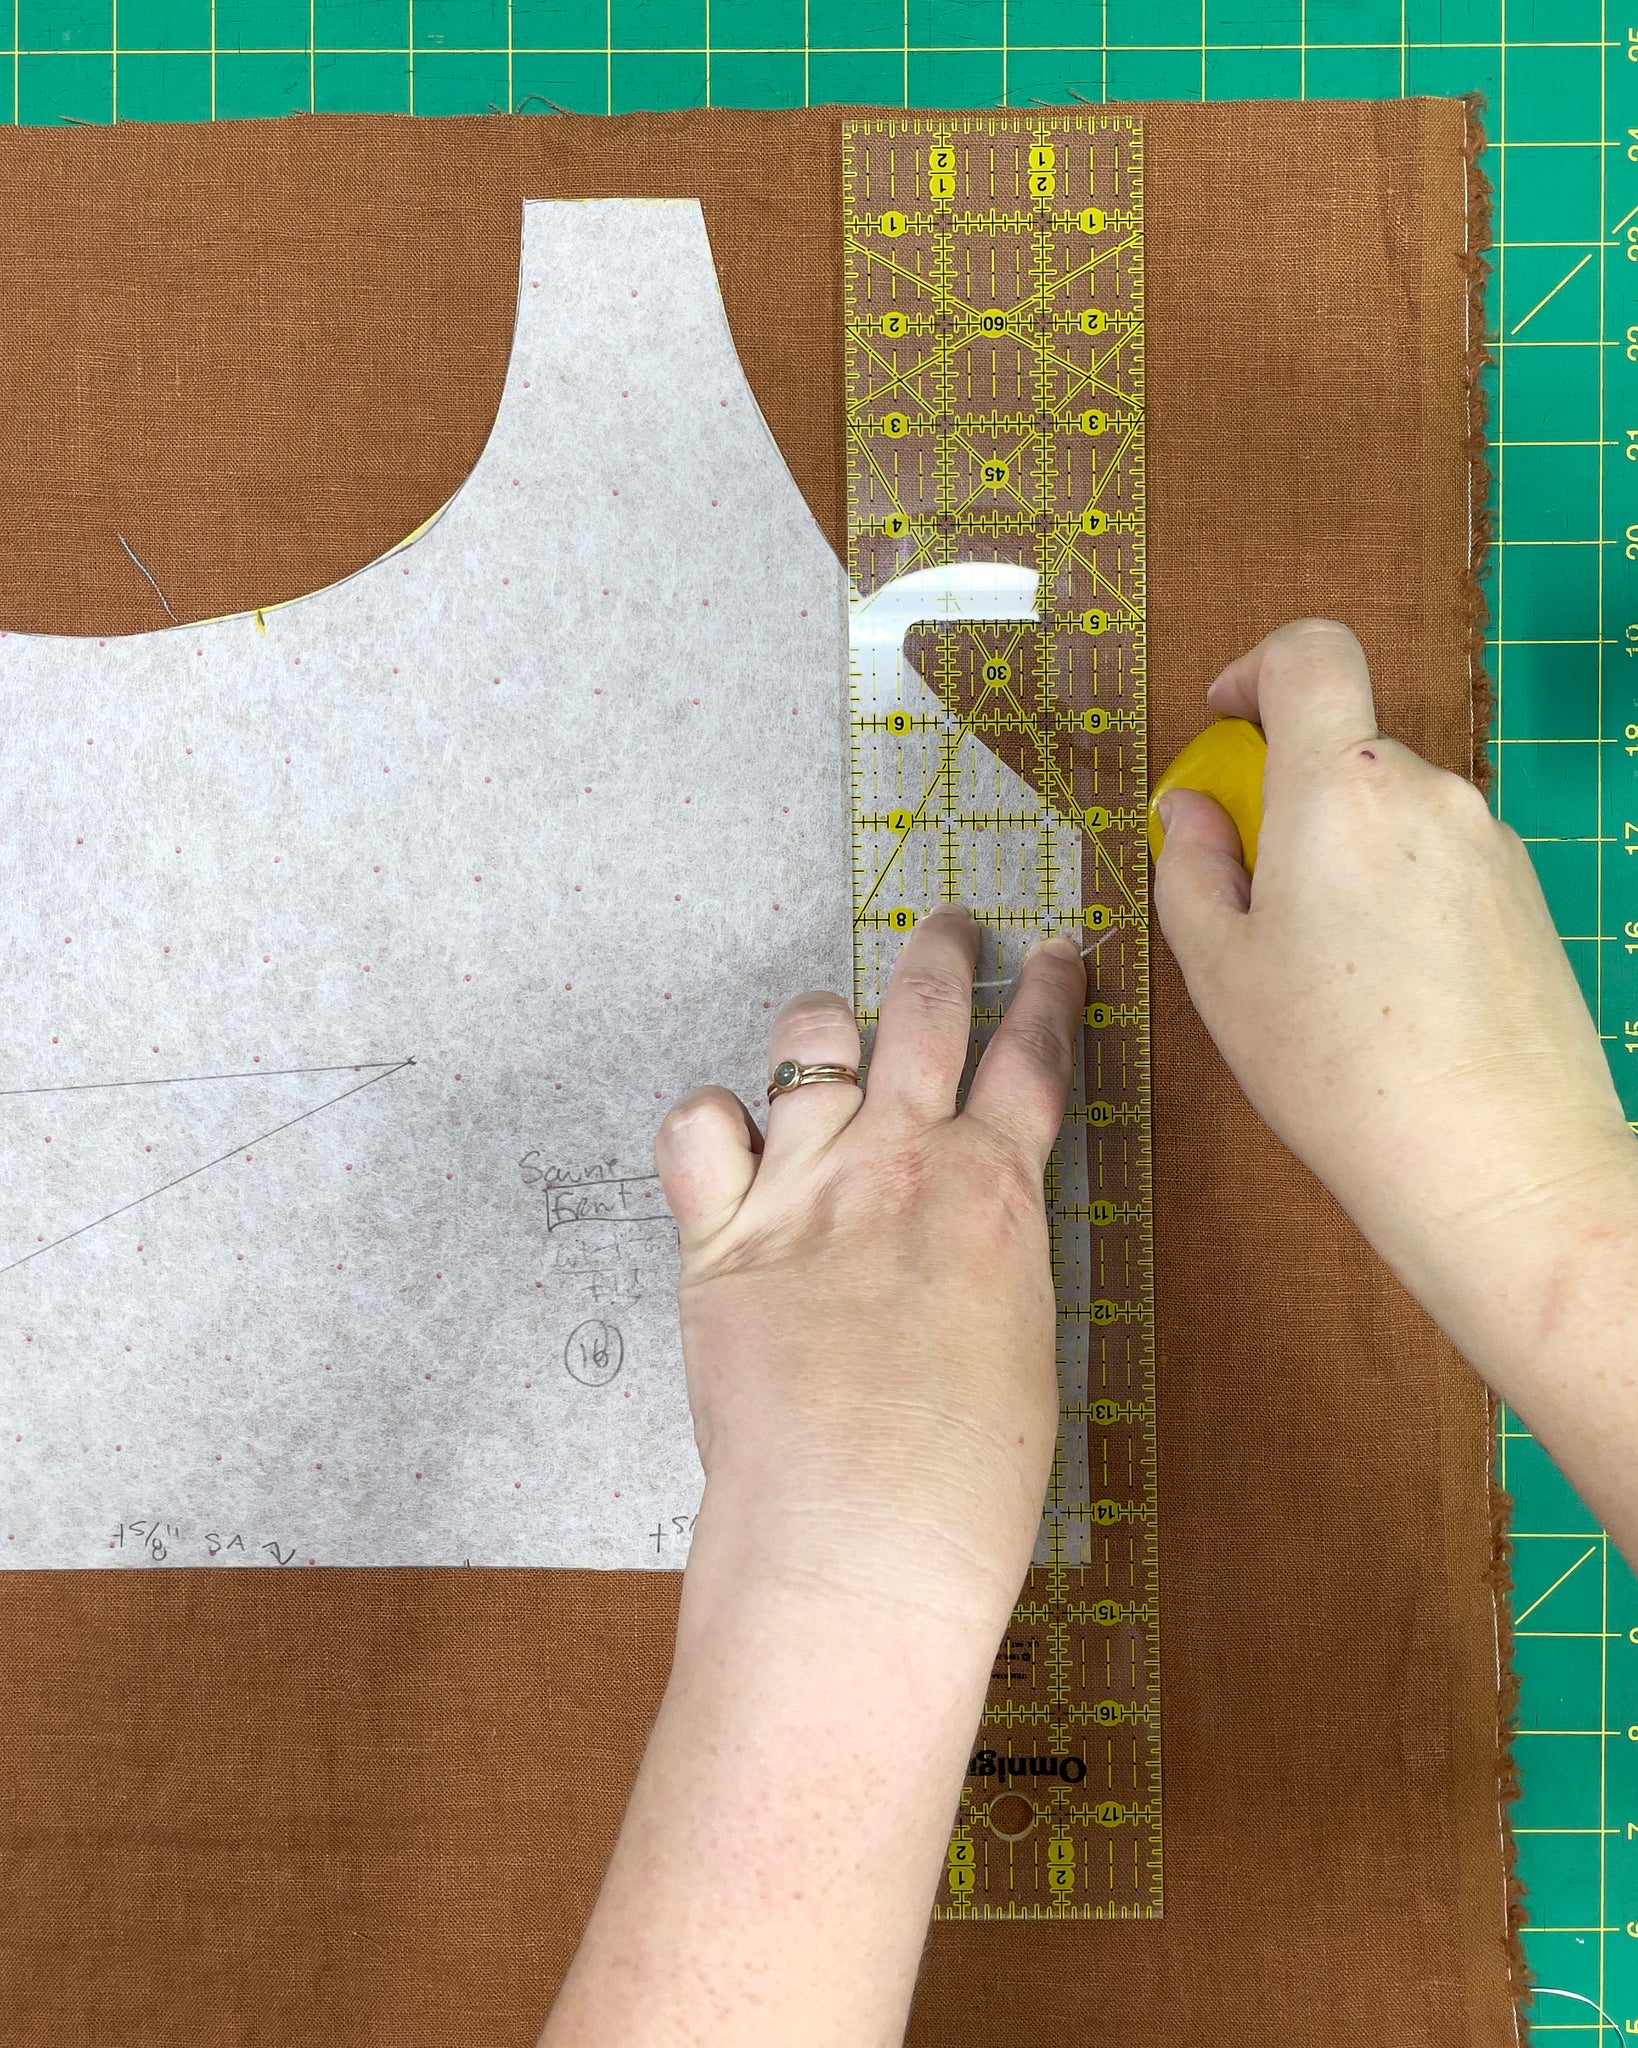 Marking the seam allowance and cutting lines for the front bodice pattern piece of the Sauvie Sundress, on top of a scrap of linen fabric.